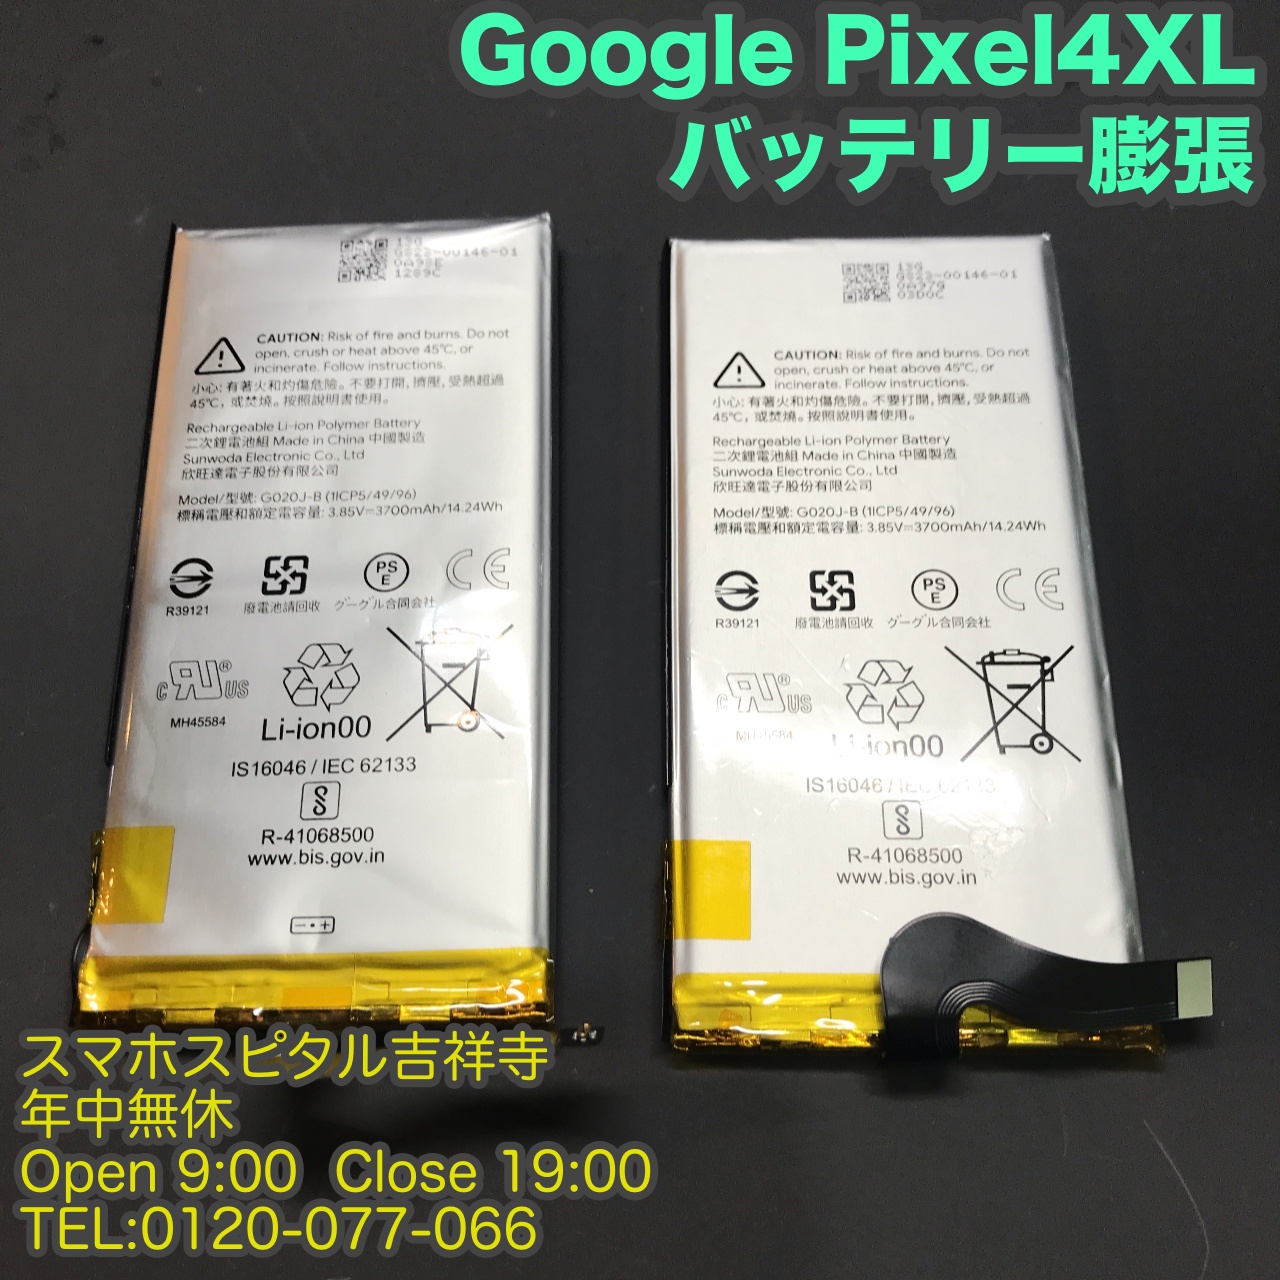 google-pixel-4xl-%e3%83%8f%e3%82%99%e3%83%83%e3%83%86%e3%83%aa%e3%83%bc%e8%86%a8%e5%bc%b5%e3%80%80android%e4%bf%ae%e7%90%86%e3%81%af%e3%82%b9%e3%83%9e%e3%83%9b%e3%82%b9%e3%83%92%e3%82%9a%e3%82%bf